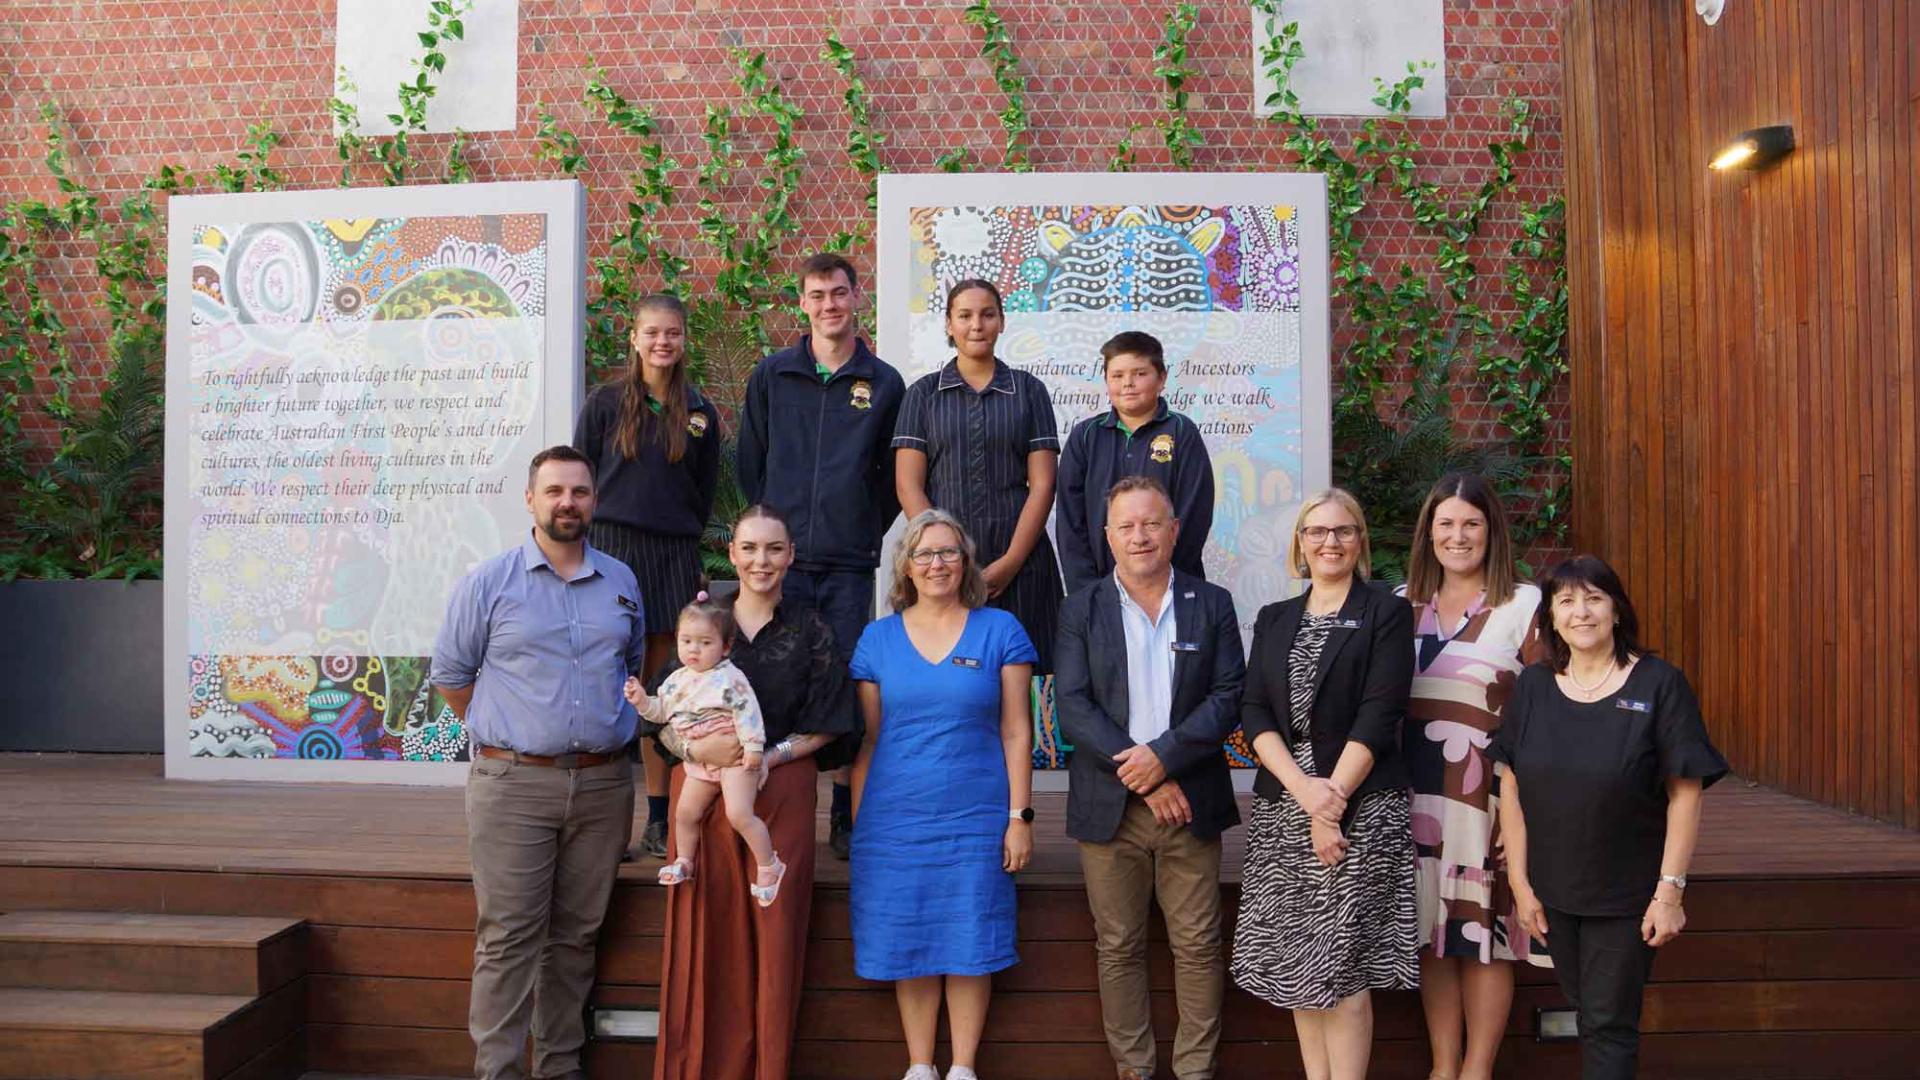 Aboriginal artwork created by local students has been installed at the Academy Ballarat centre. Students met with Academy and Department of Education staff to celebrate.